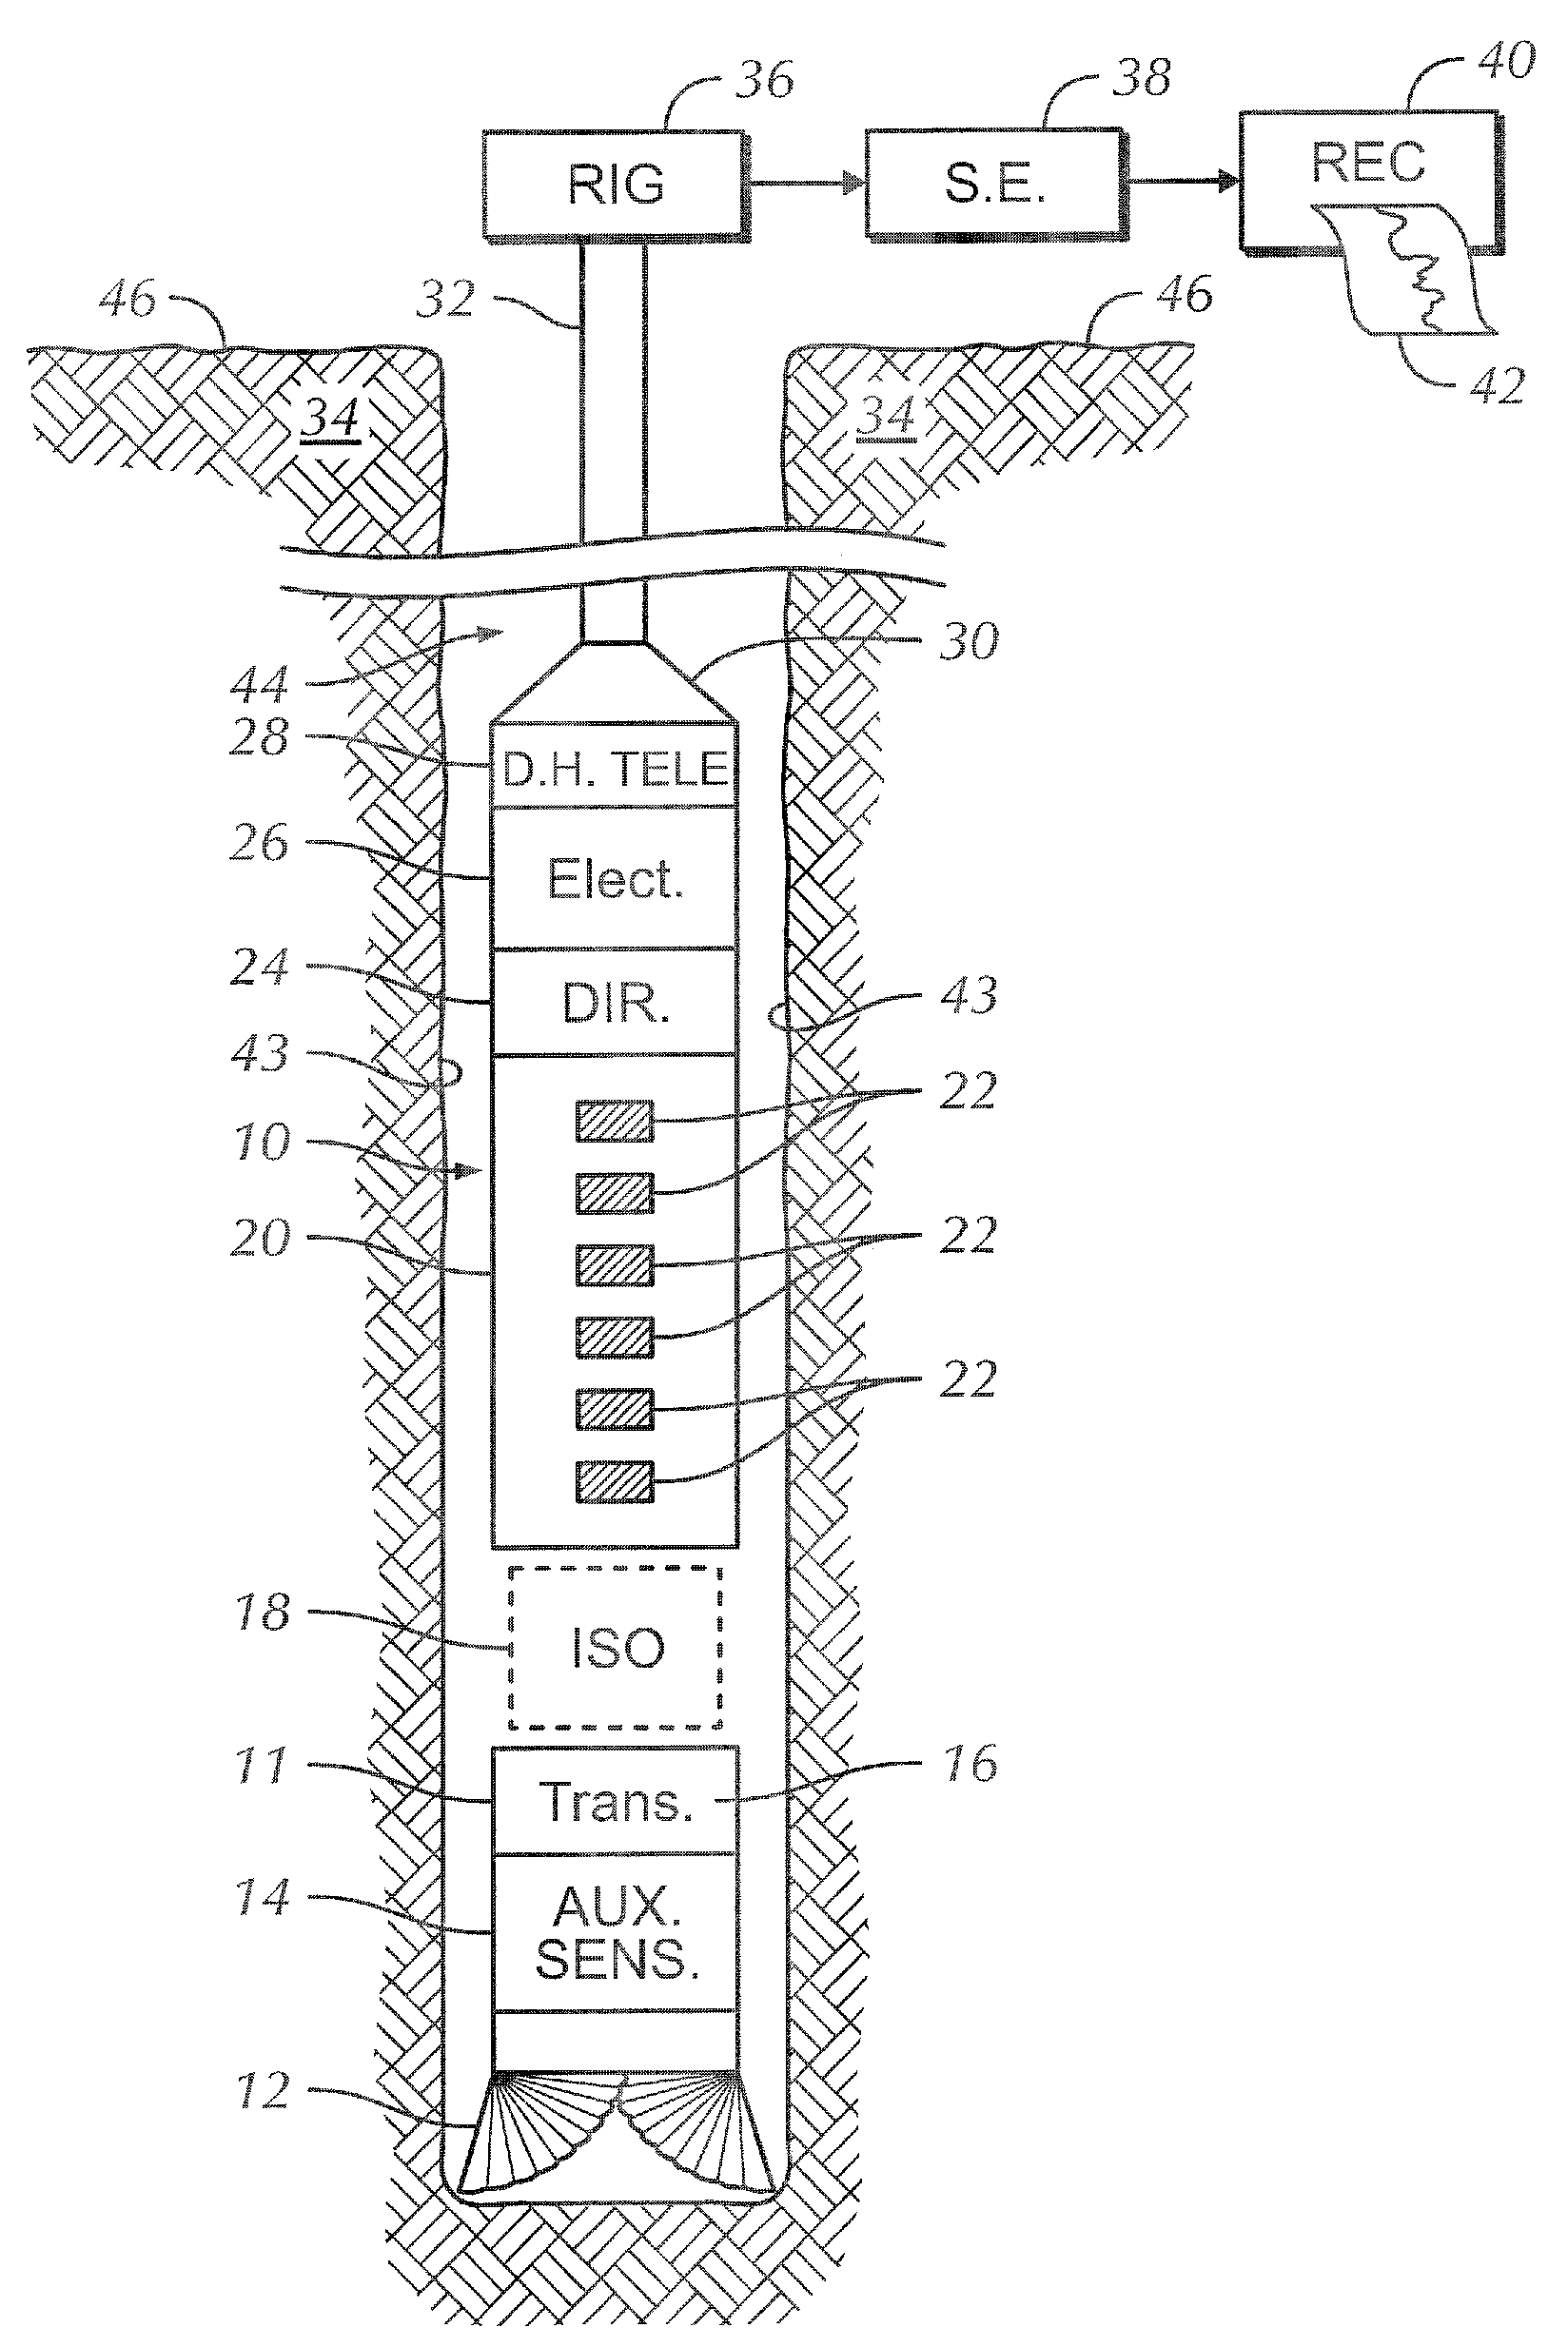 Monopole acoustic transmitter ring comprising piezoelectric material